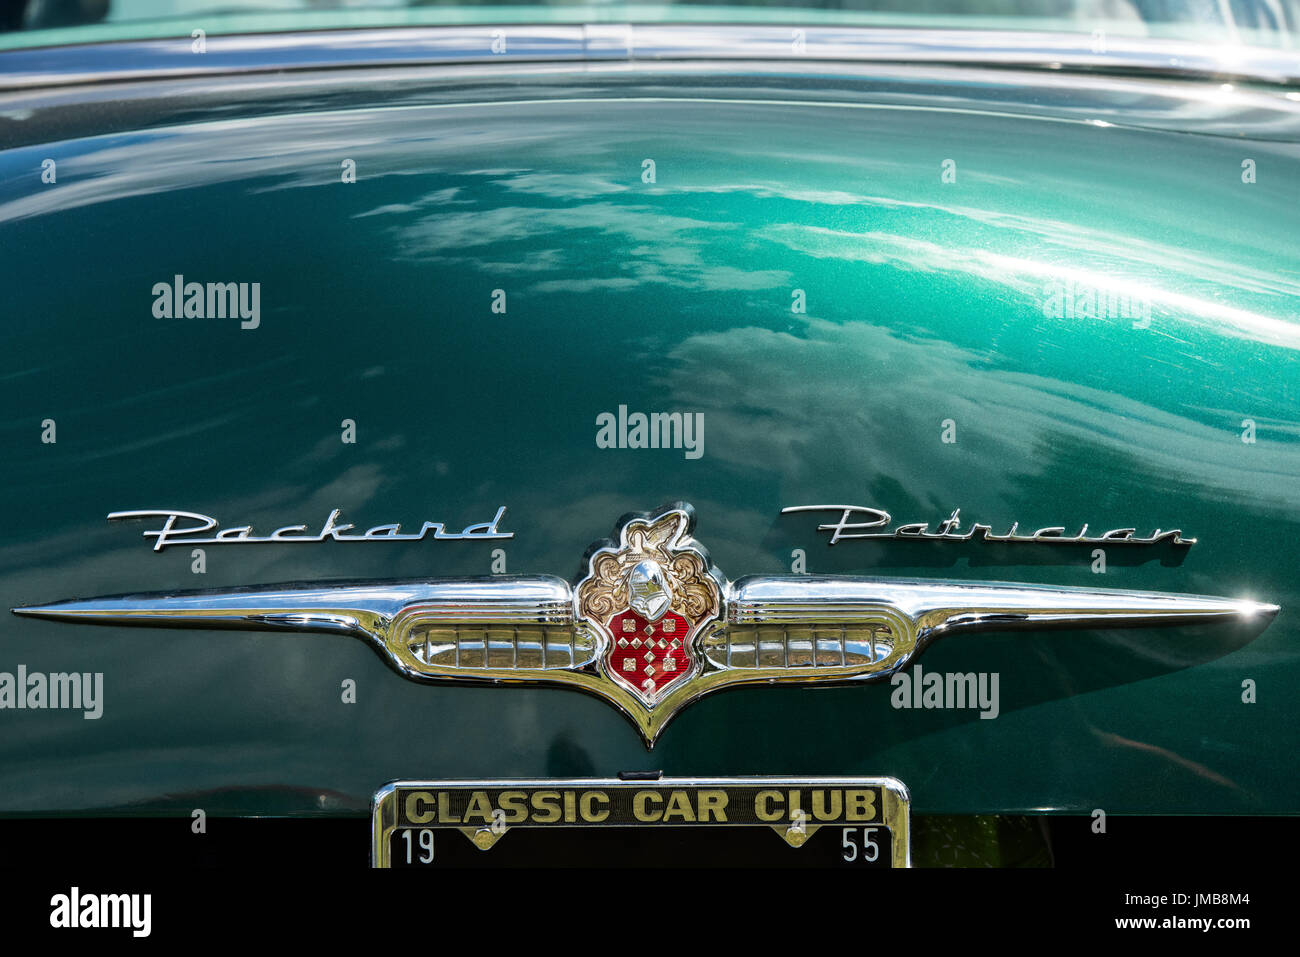 1955 Packard Patrician car with chrome badge detail at an American car show. Essex, UK Stock Photo